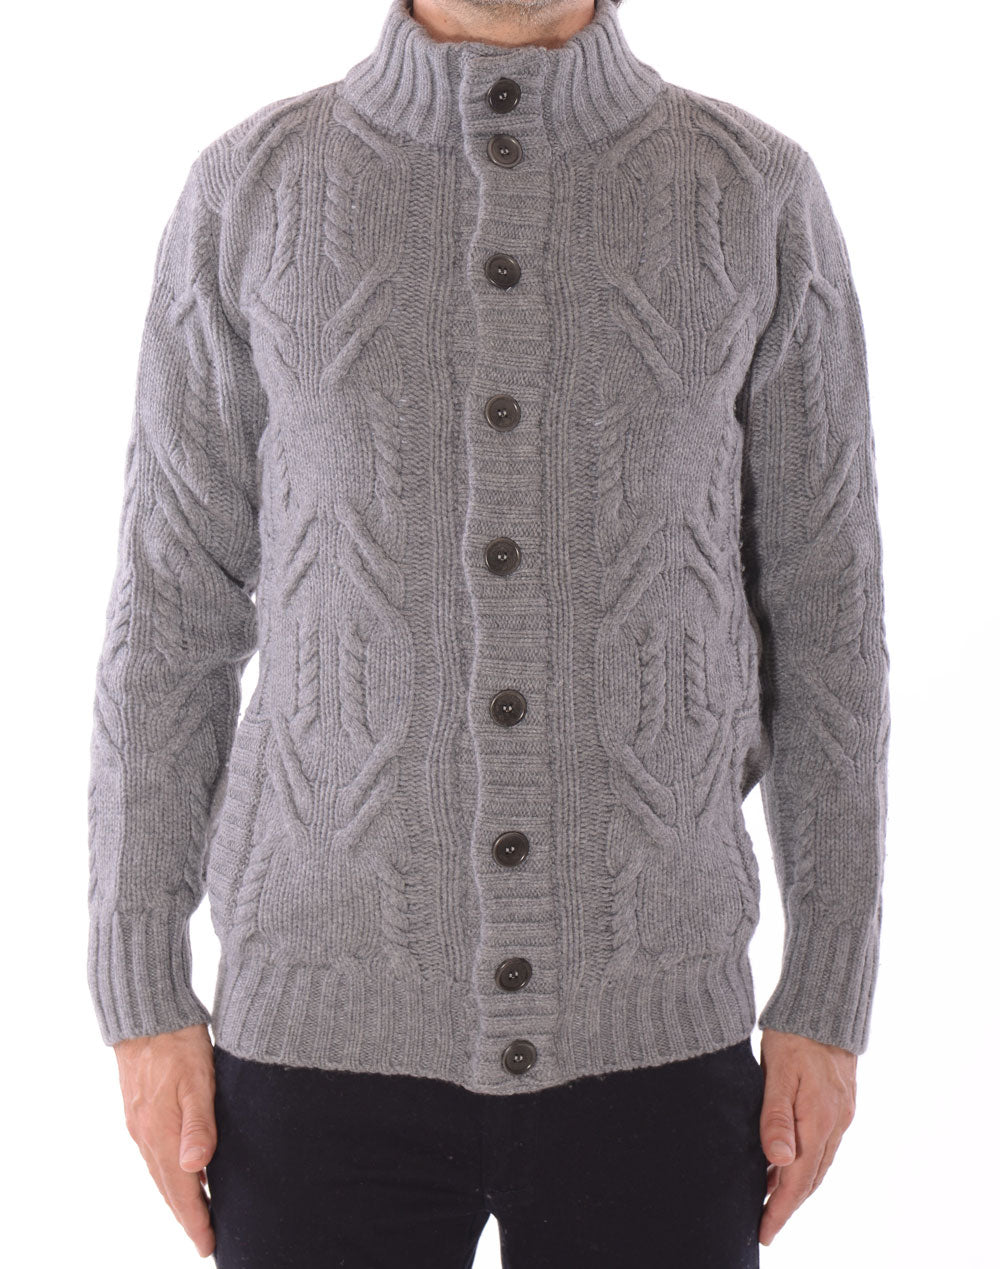 Turtleneck cardigan with 9 buttons